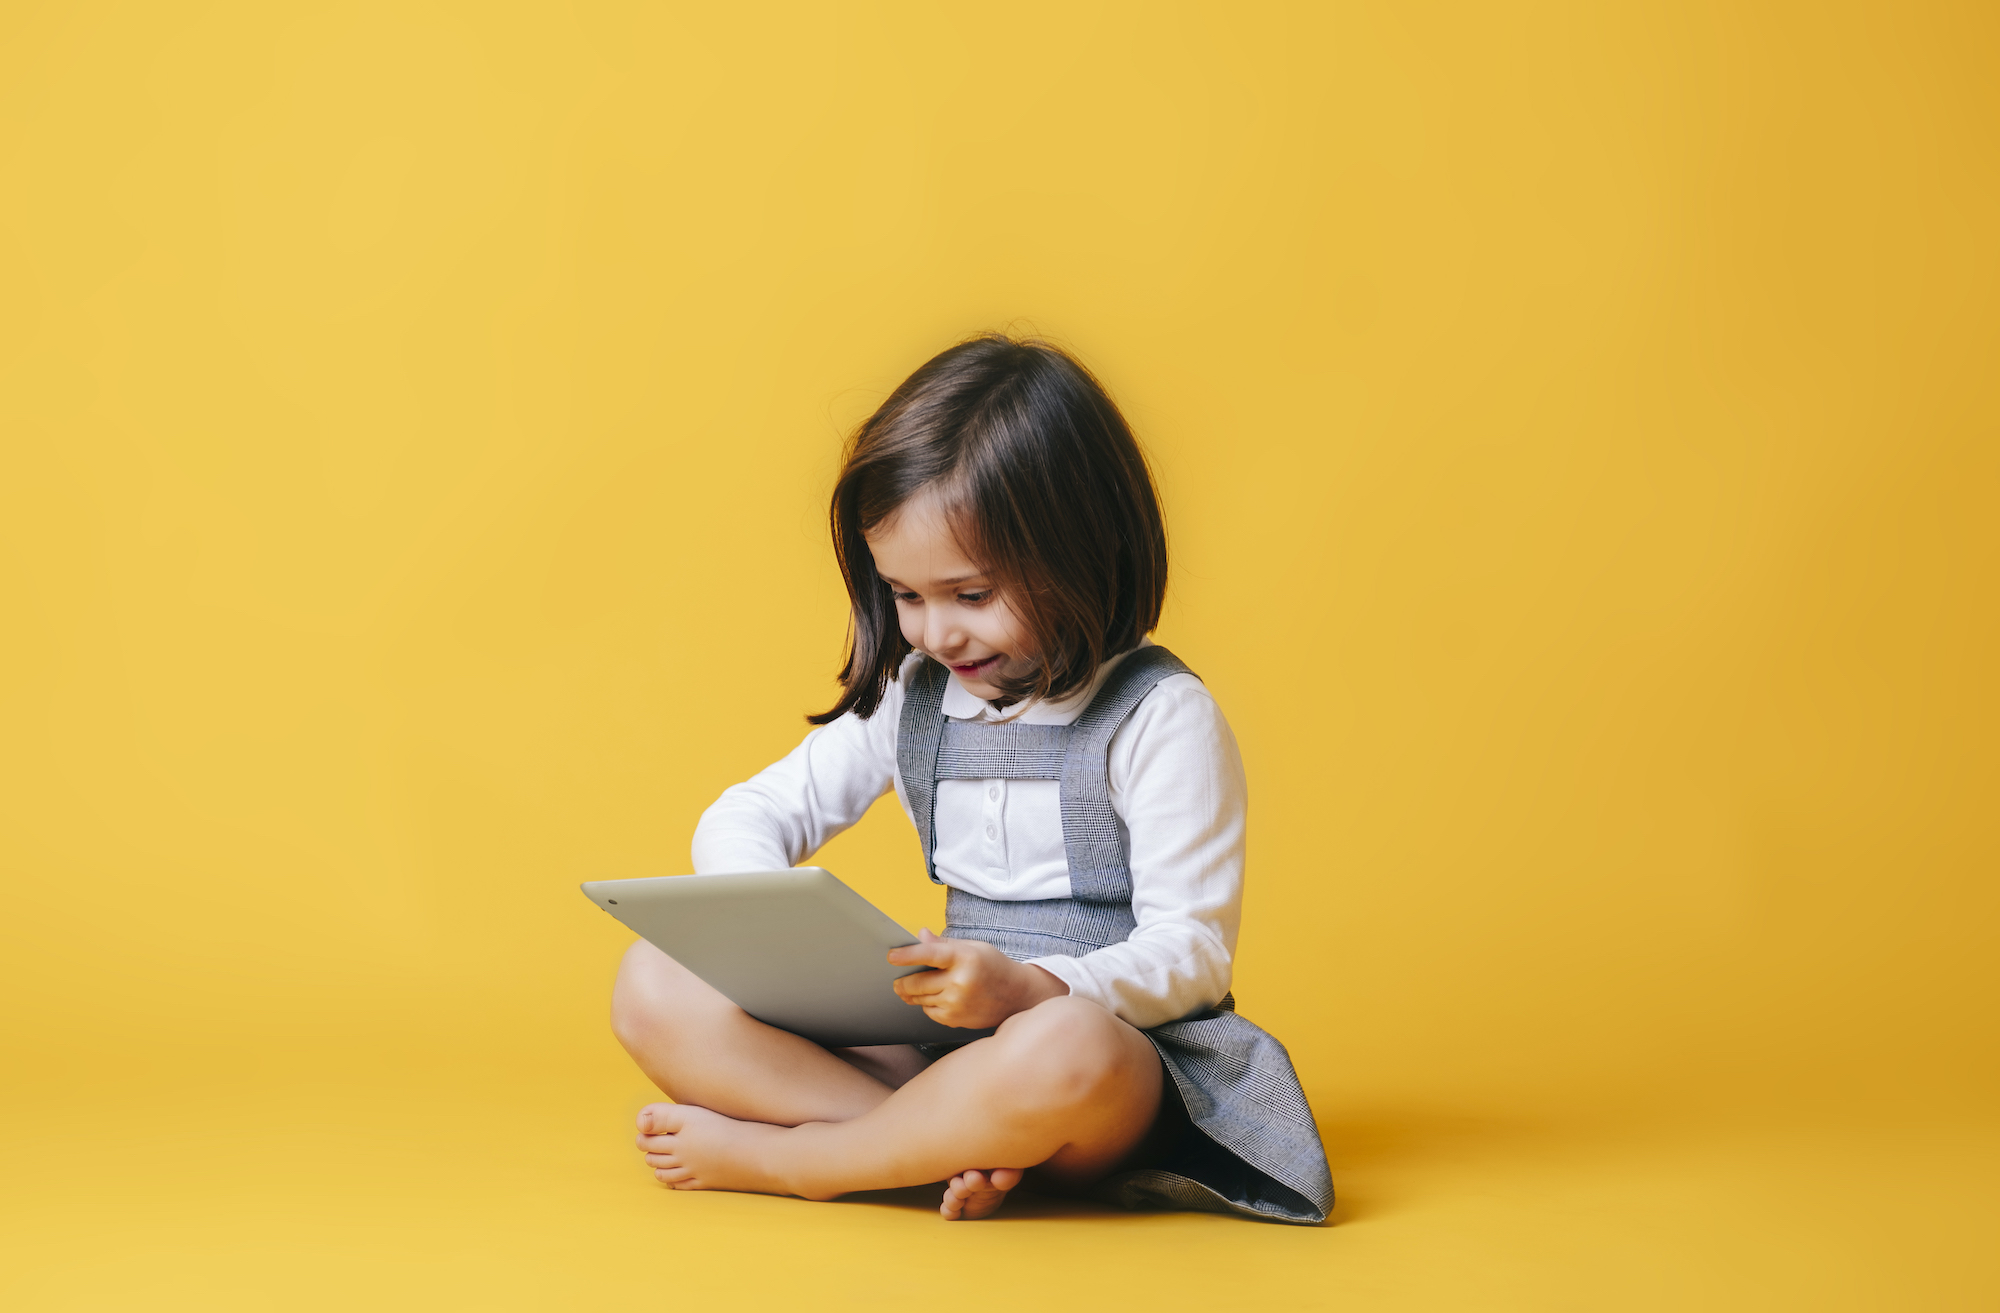 A caucasian girl in a gray dress and white shirt uses and plays with a tablet on a yellow background